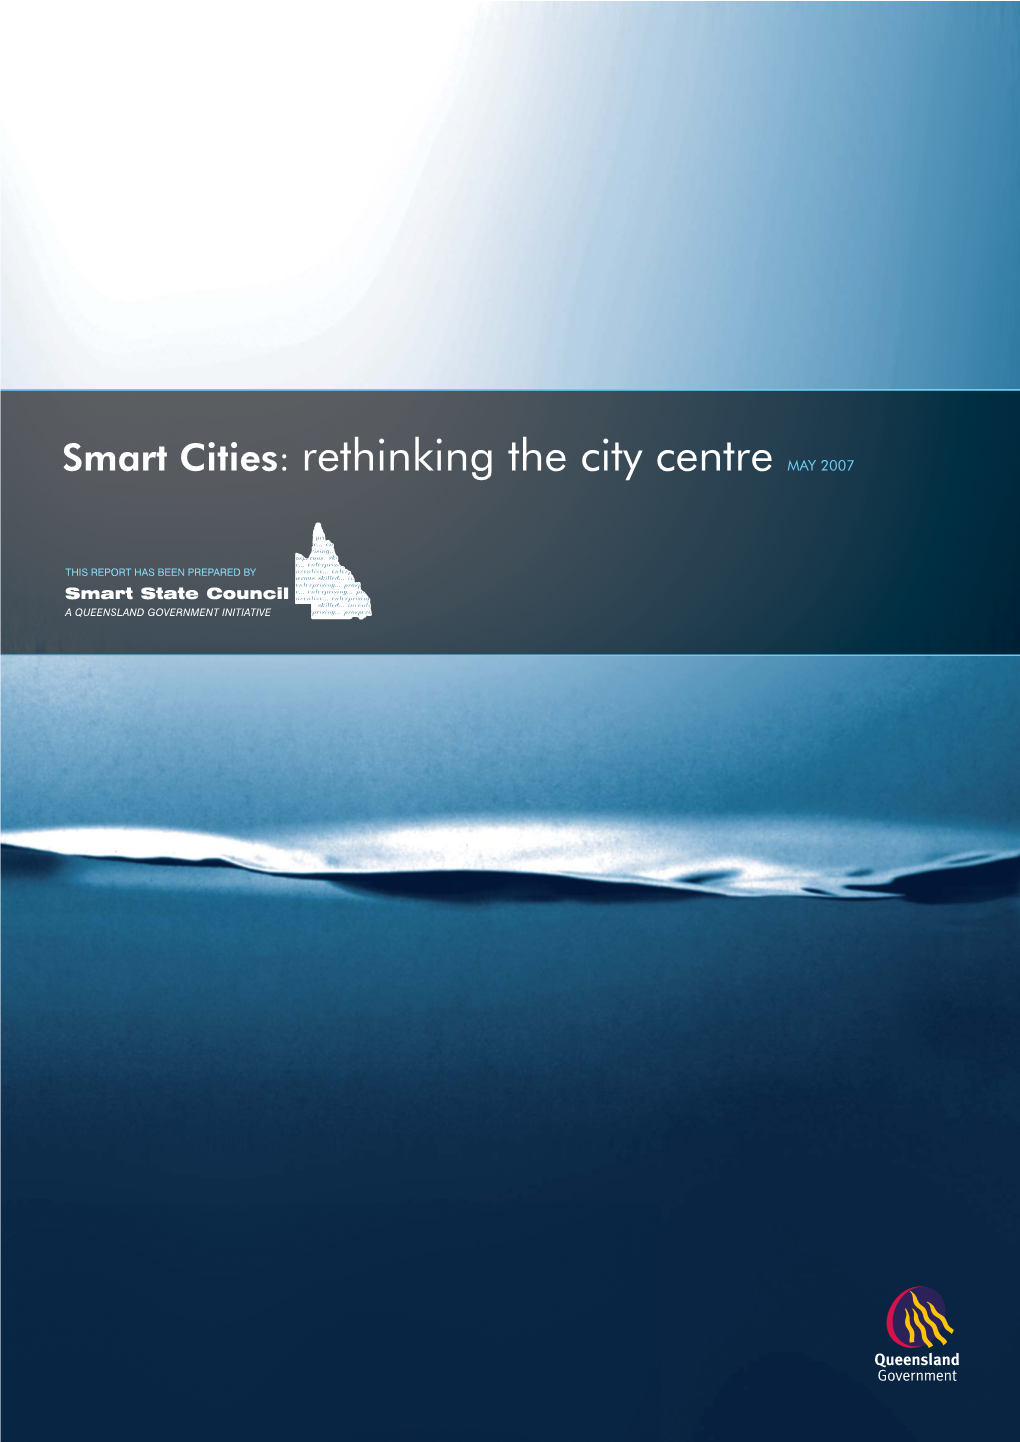 Smart Cities: Rethinking the City Centre MAY 2007